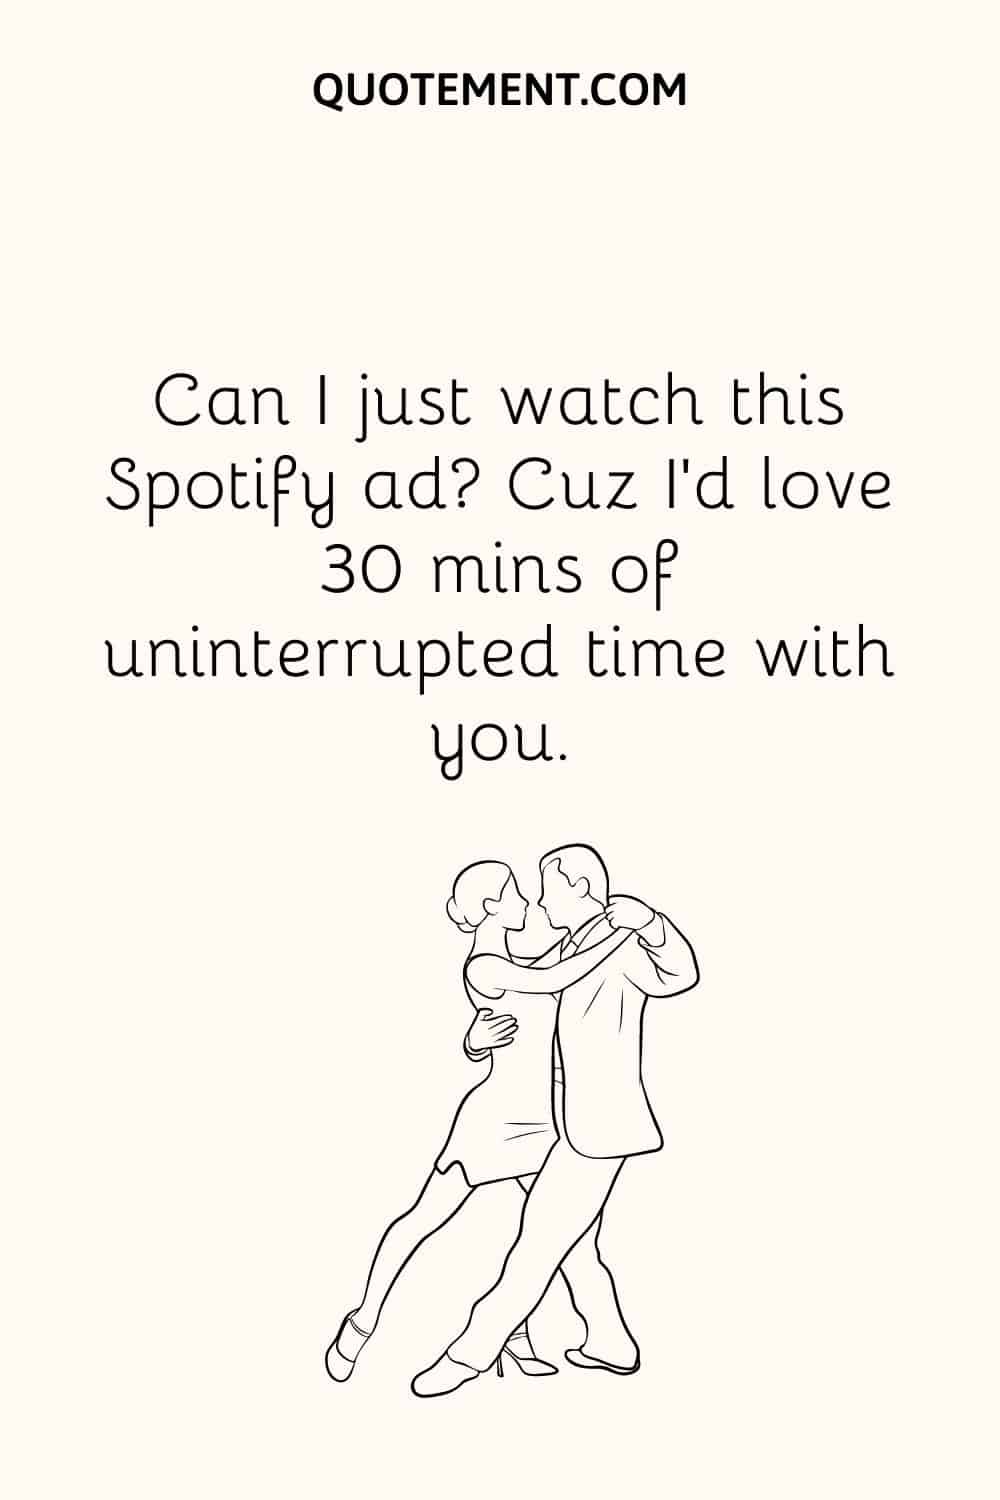 Can I just watch this Spotify ad Cuz I’d love 30 mins of uninterrupted time with you